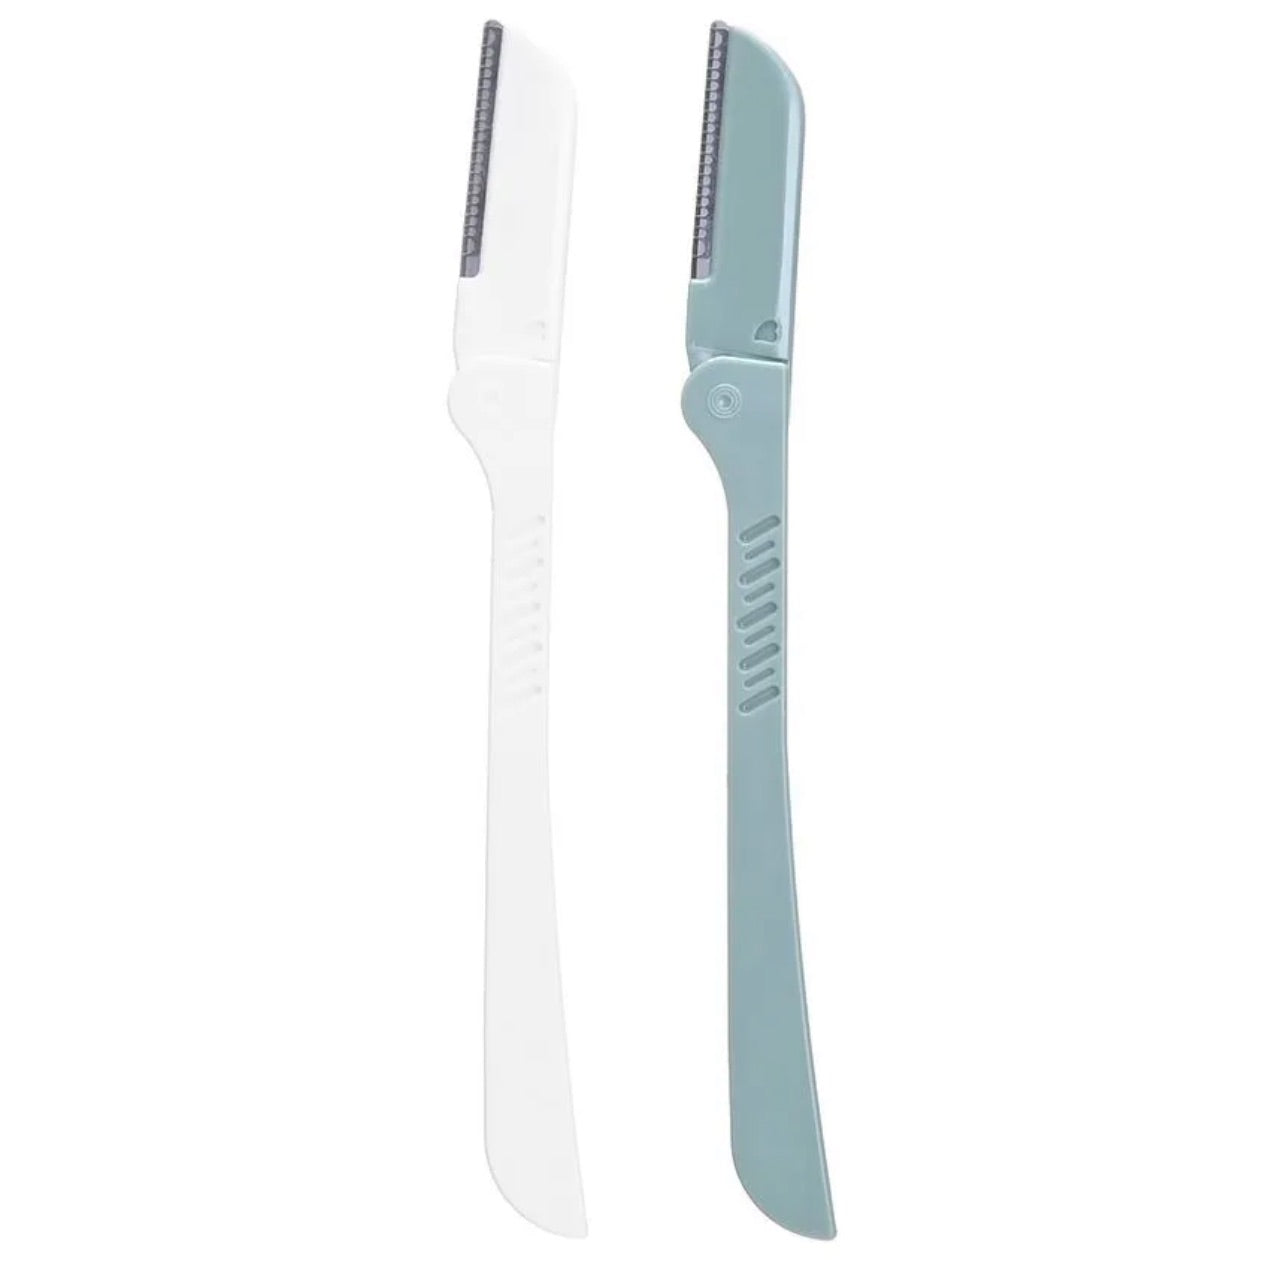 THE FACE SHOP - Daily Beauty Tools Folding Eyebrow Trimmer